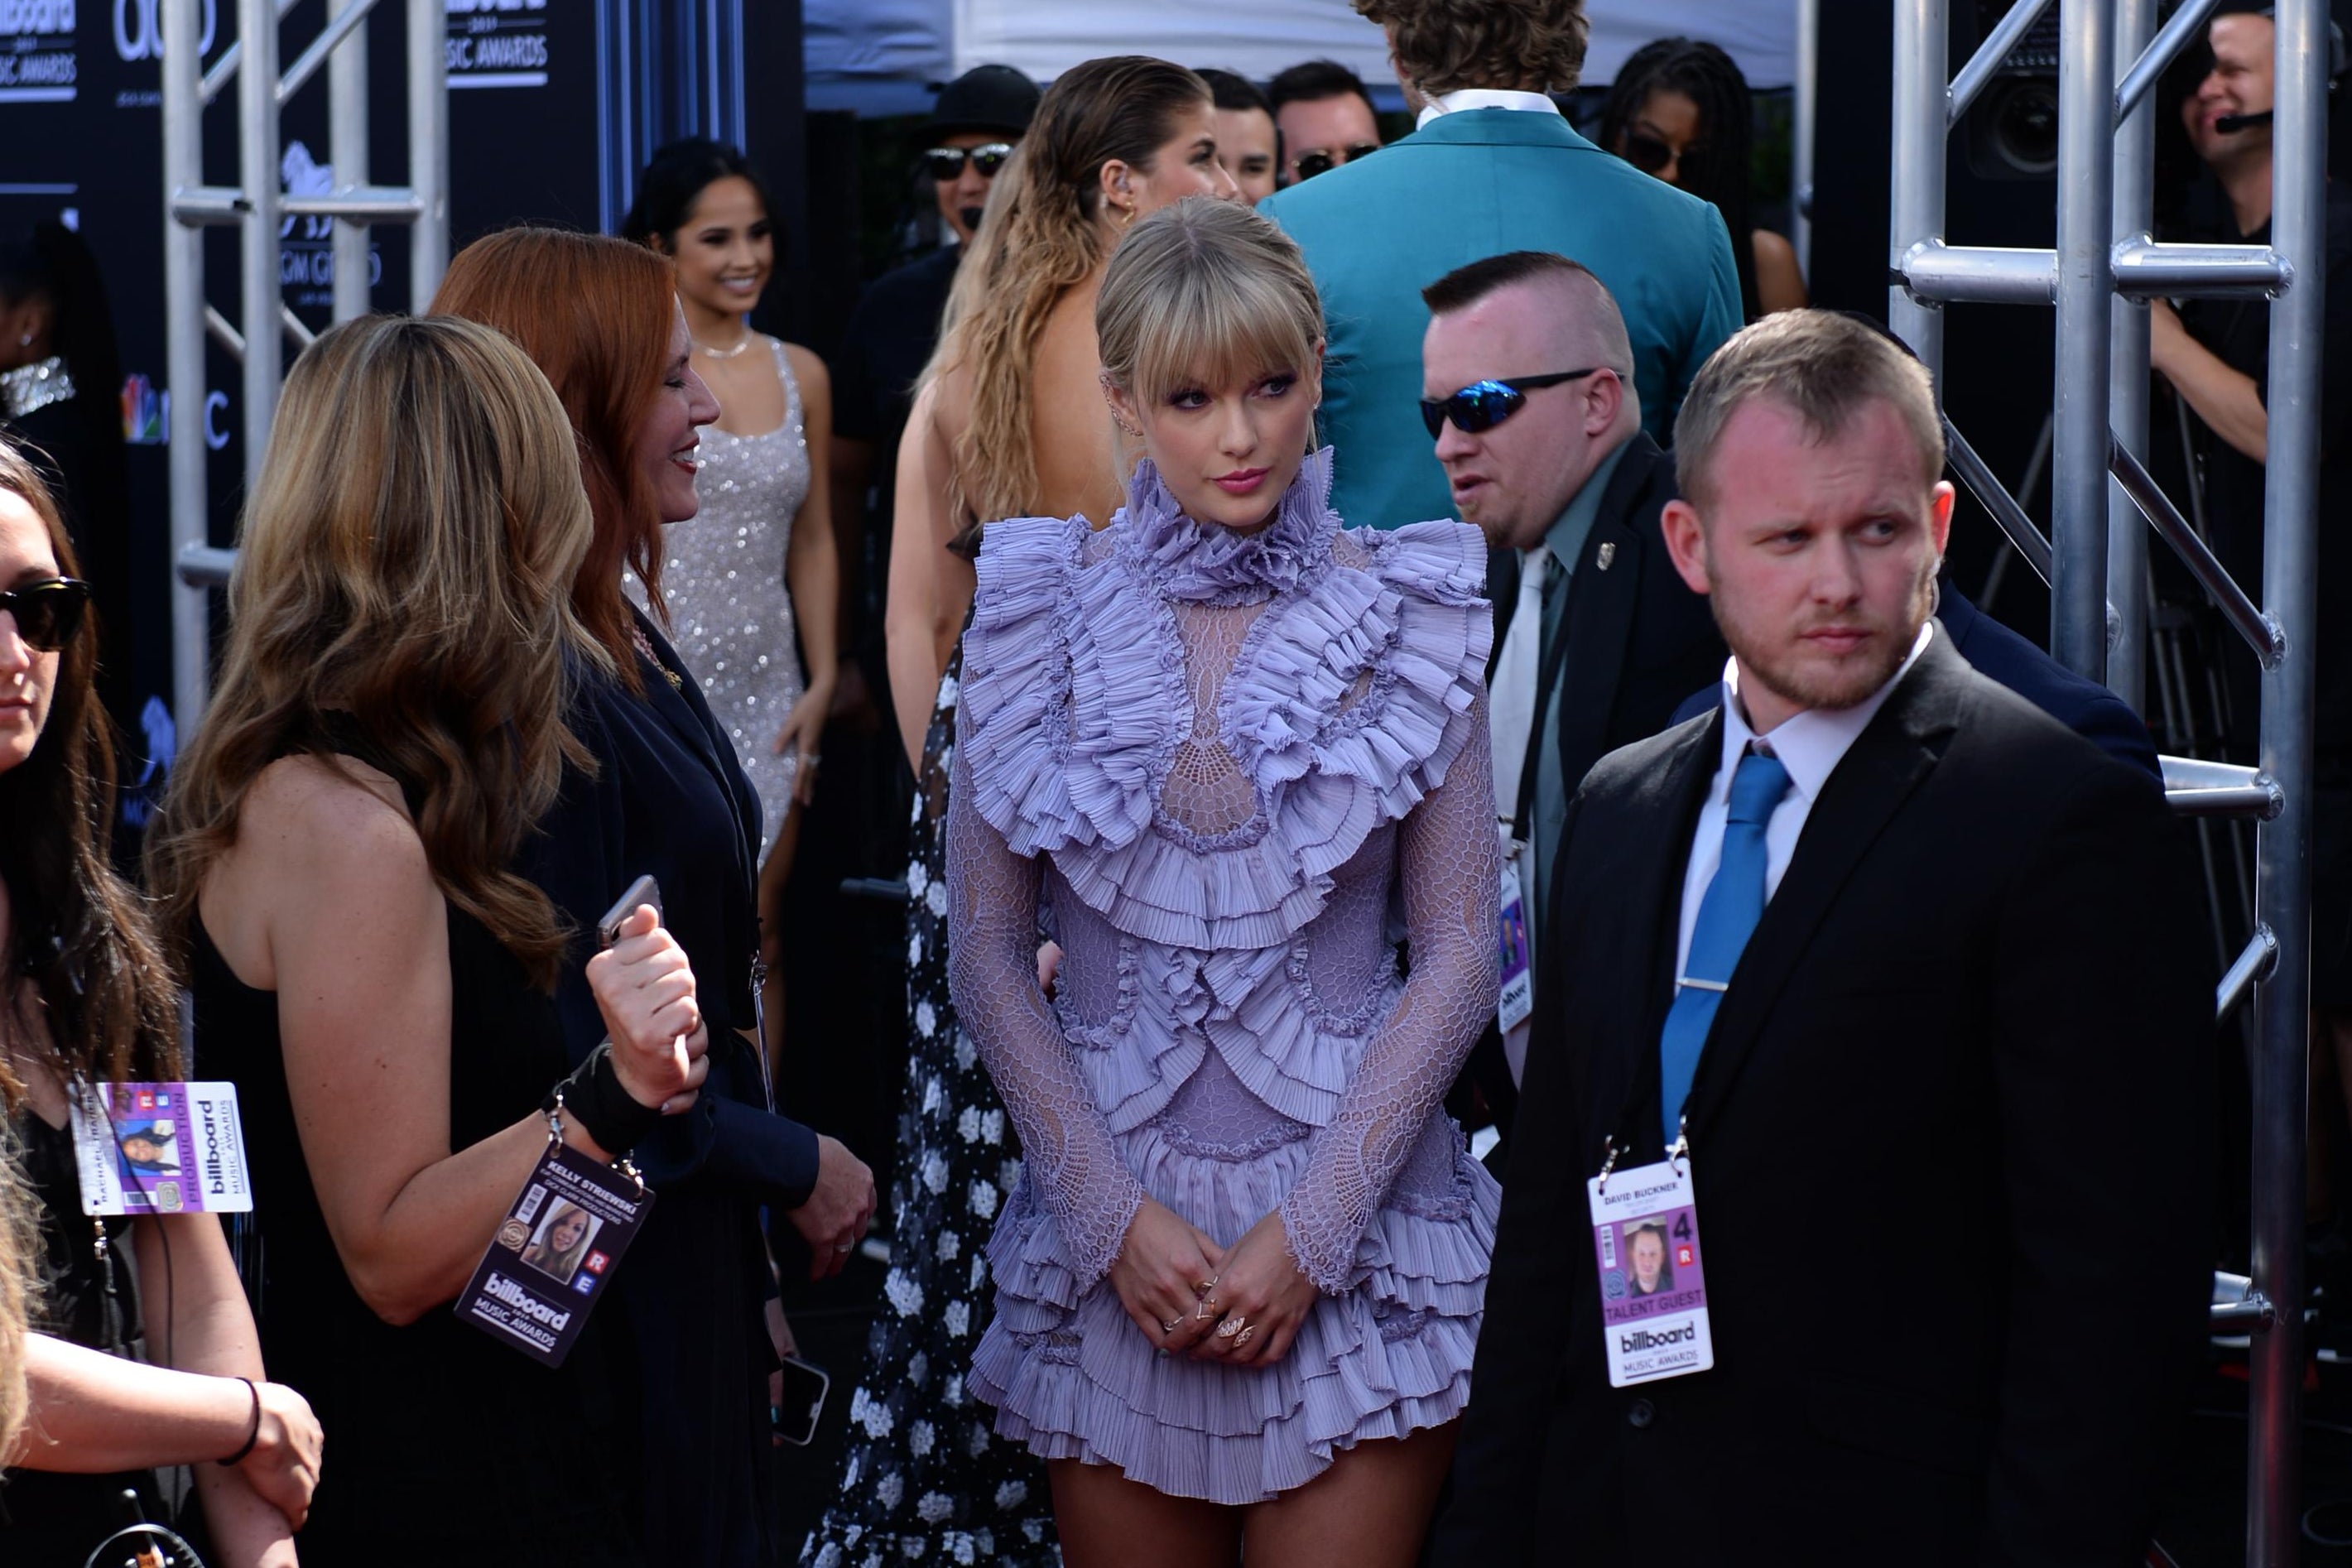 US singer Taylor Swift (C) waits to walk the red carpet as she arrives for the 2019 Billboard Music Awards at the MGM Grand Garden Arena on May 1, 2019, in Las Vegas, Nevada. (Photo by Bridget BENNETT / AFP)        (Photo credit should read BRIDGET BENNETT/AFP/Getty Images)